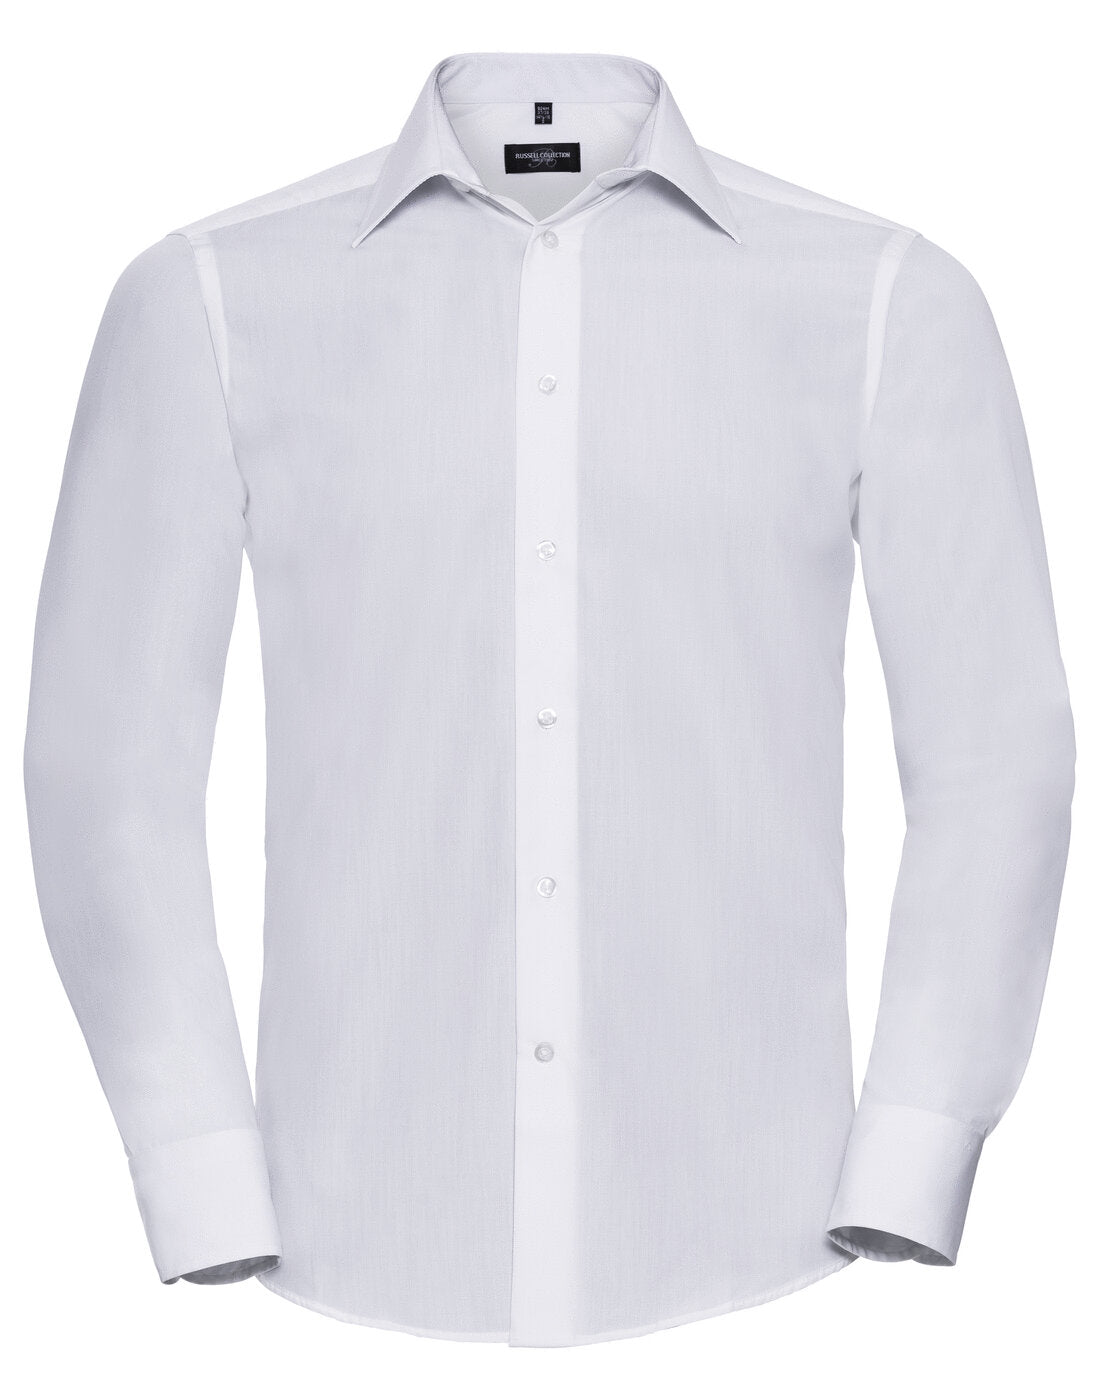 Russell Mens Long Sleeve Tailored Polycotton Poplin Shirt White